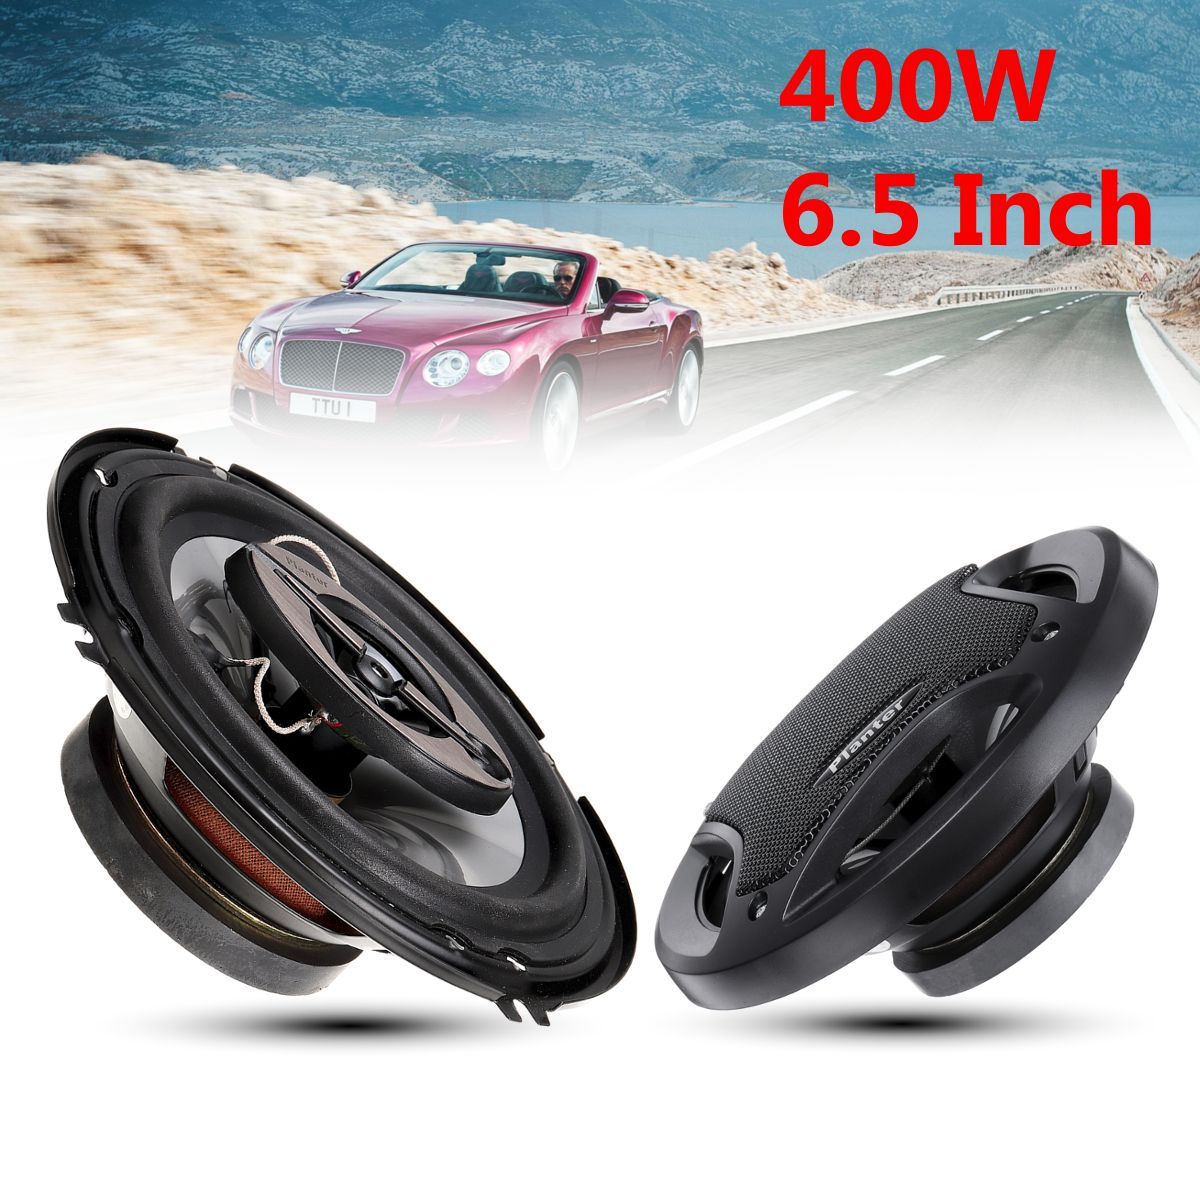 A-Pair-Of-65-Inch-400W-Coaxial-Composite-Car-Speakers-Front-And-Rear-Door-Car-Speaker-1318166